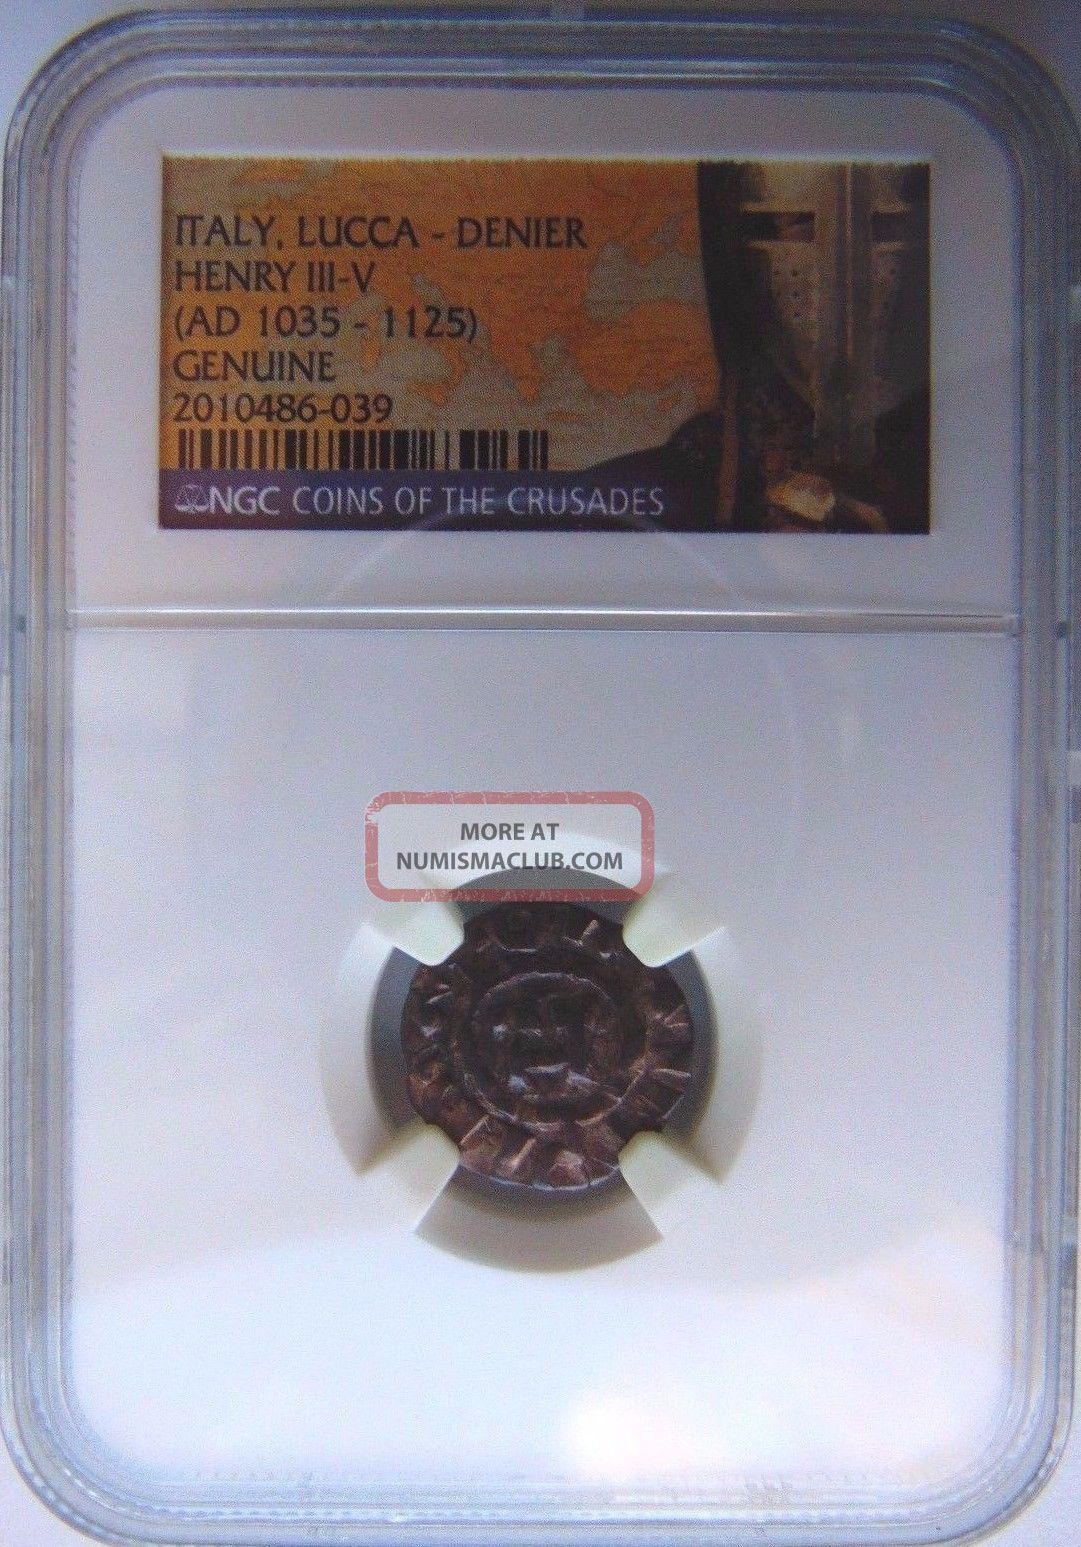 King Henry 1035 - 1125 Ad Ngc Medieval Lucca Denier Knight Templar Crusades Money Coins: Medieval photo